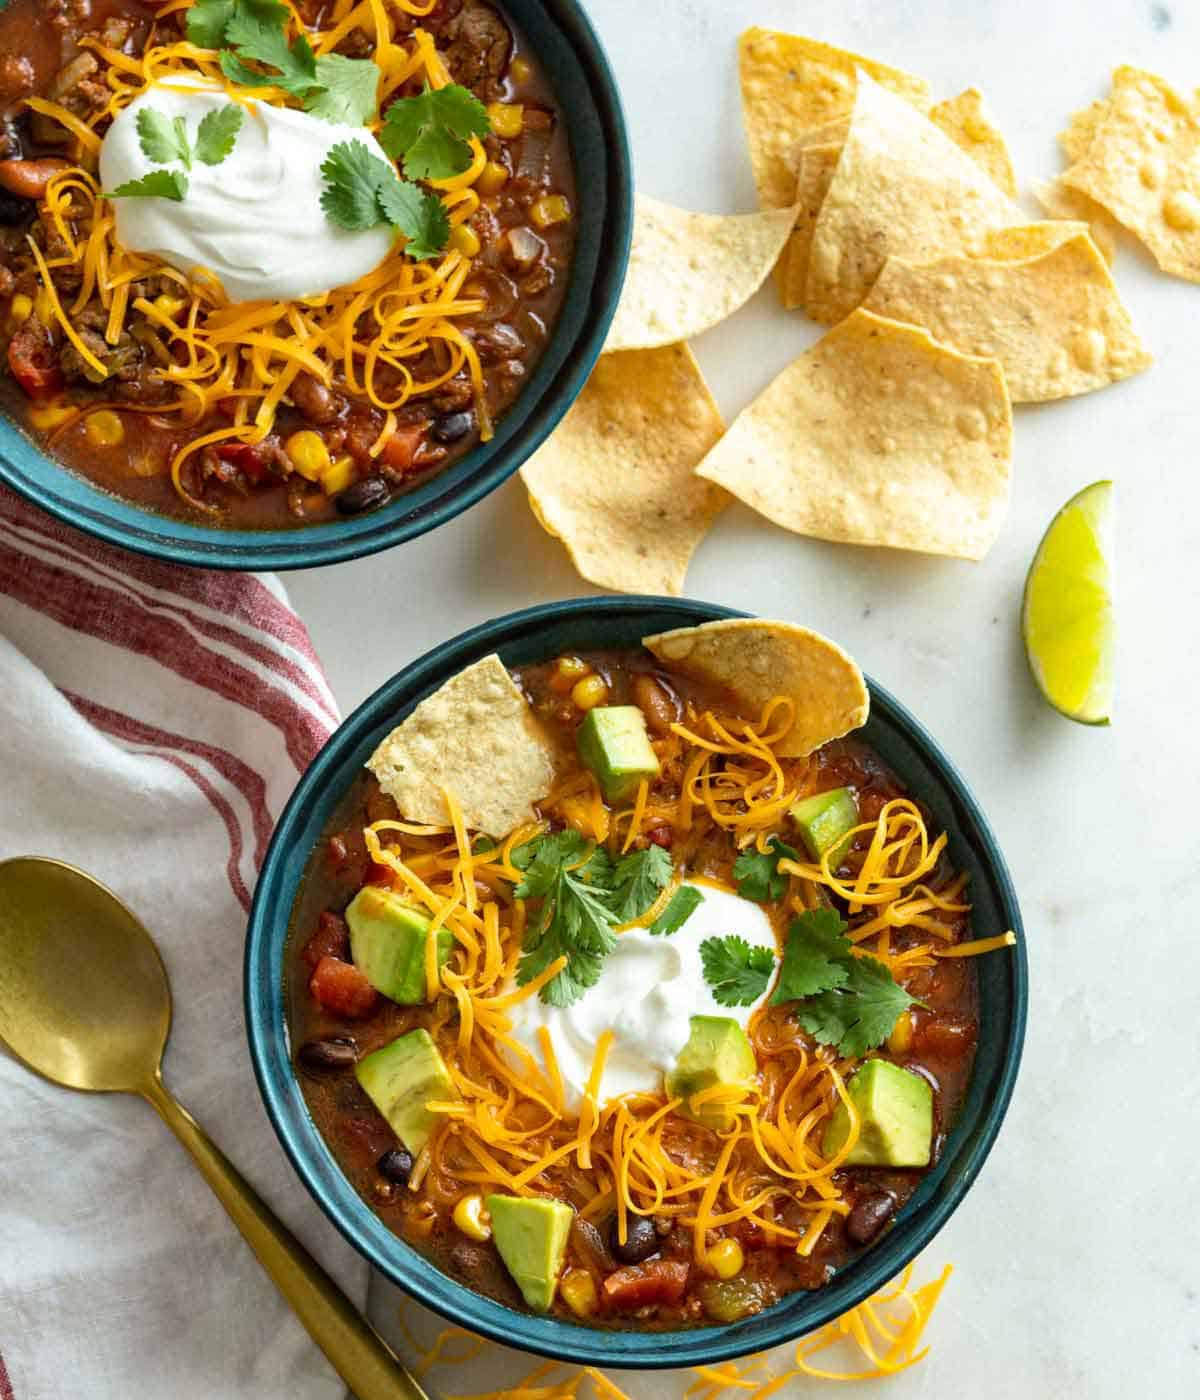 Overhead view of two bowls of taco soup with chips scattered around the bowls.